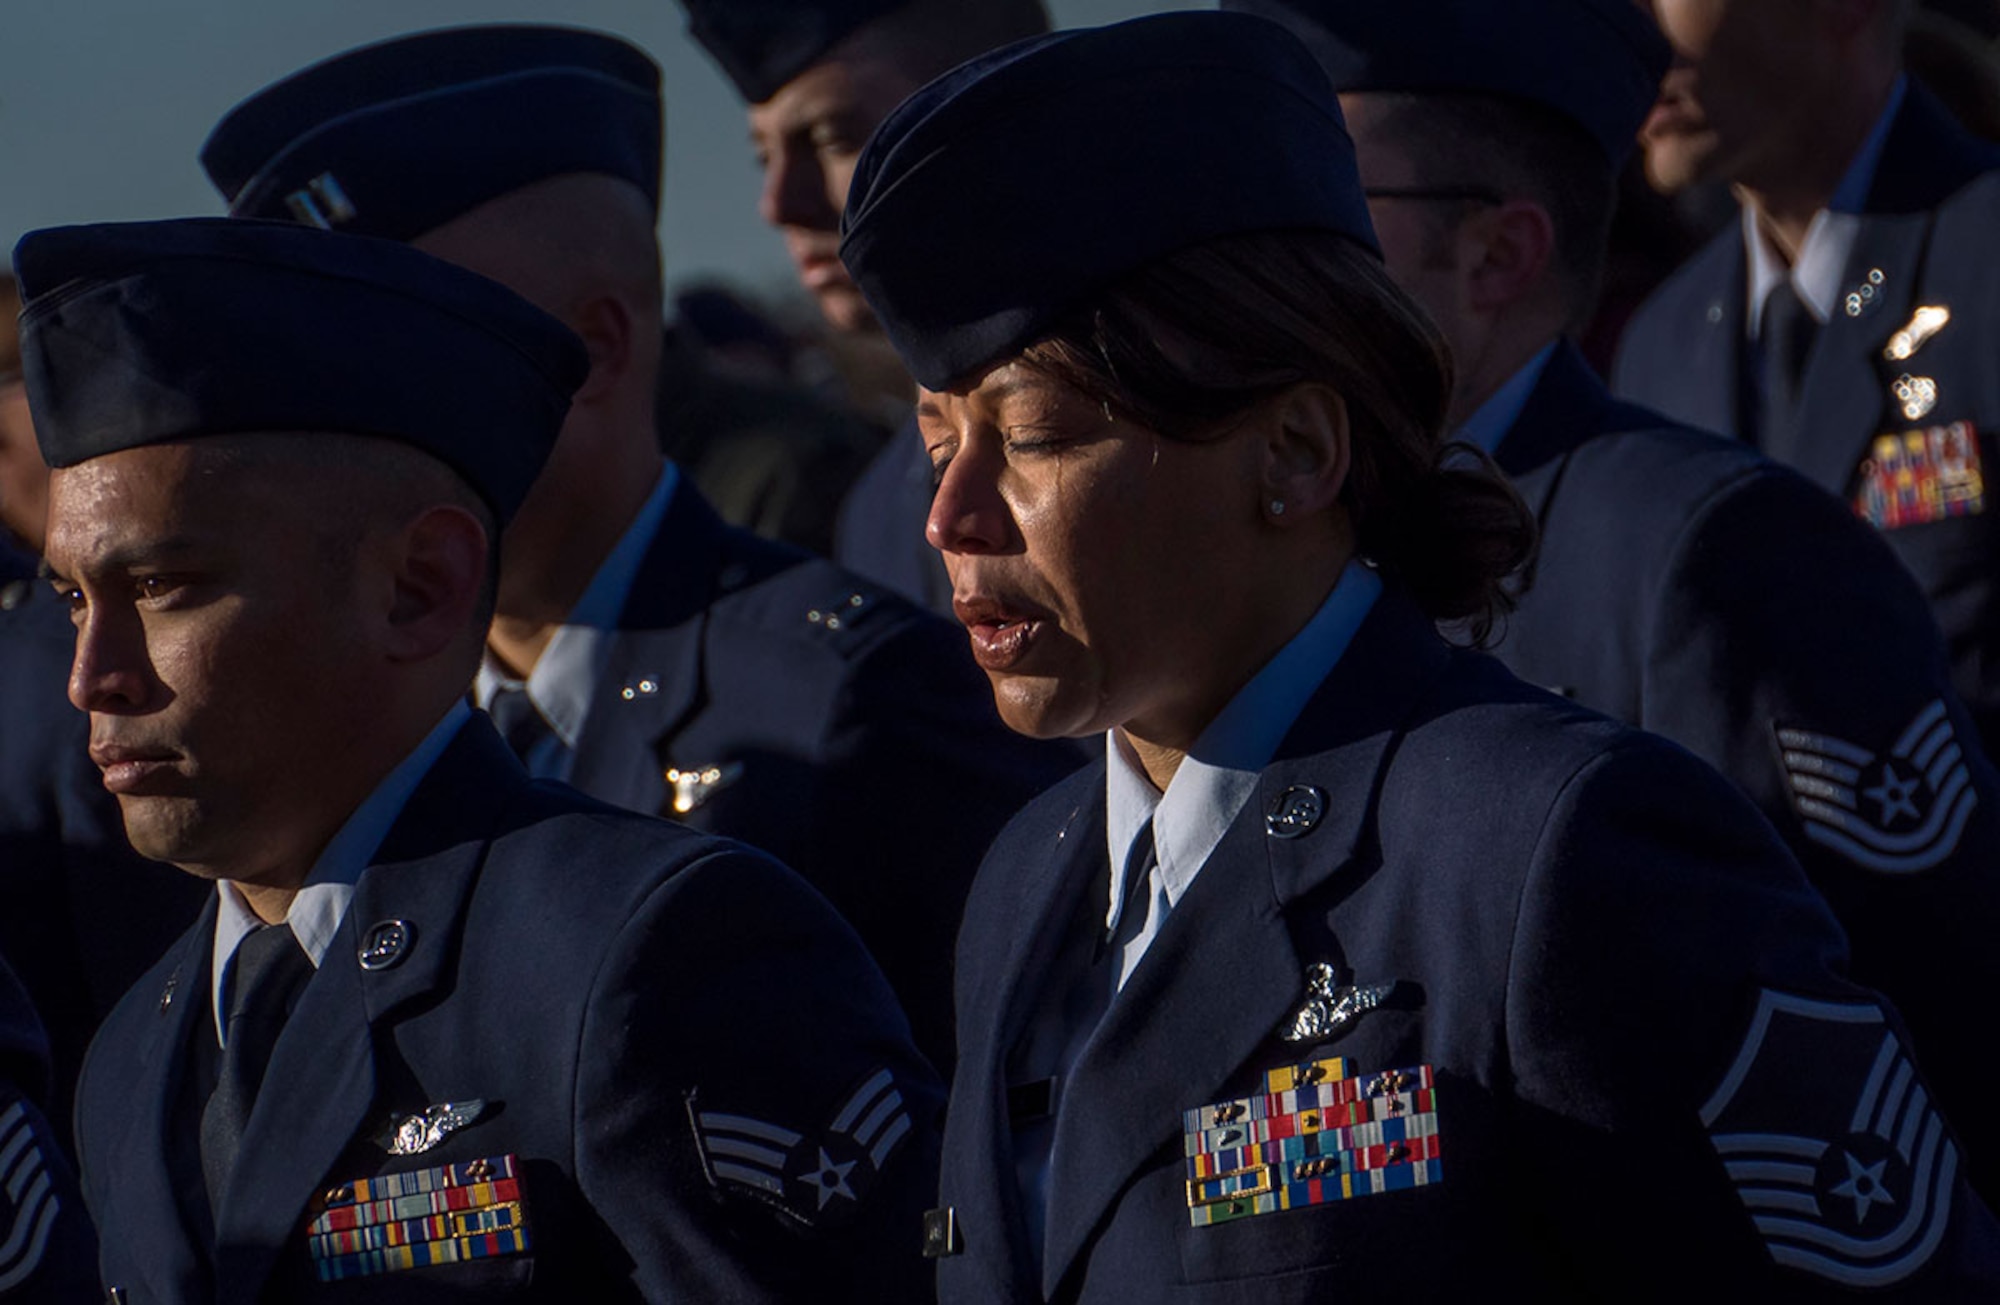 Master Sgt. Torey Moore, an Air Surveillance Technician assigned to the 962nd, shows emotion during the Yukla 27 memorial. (U.S. Air Force photo/Justin Connaher)